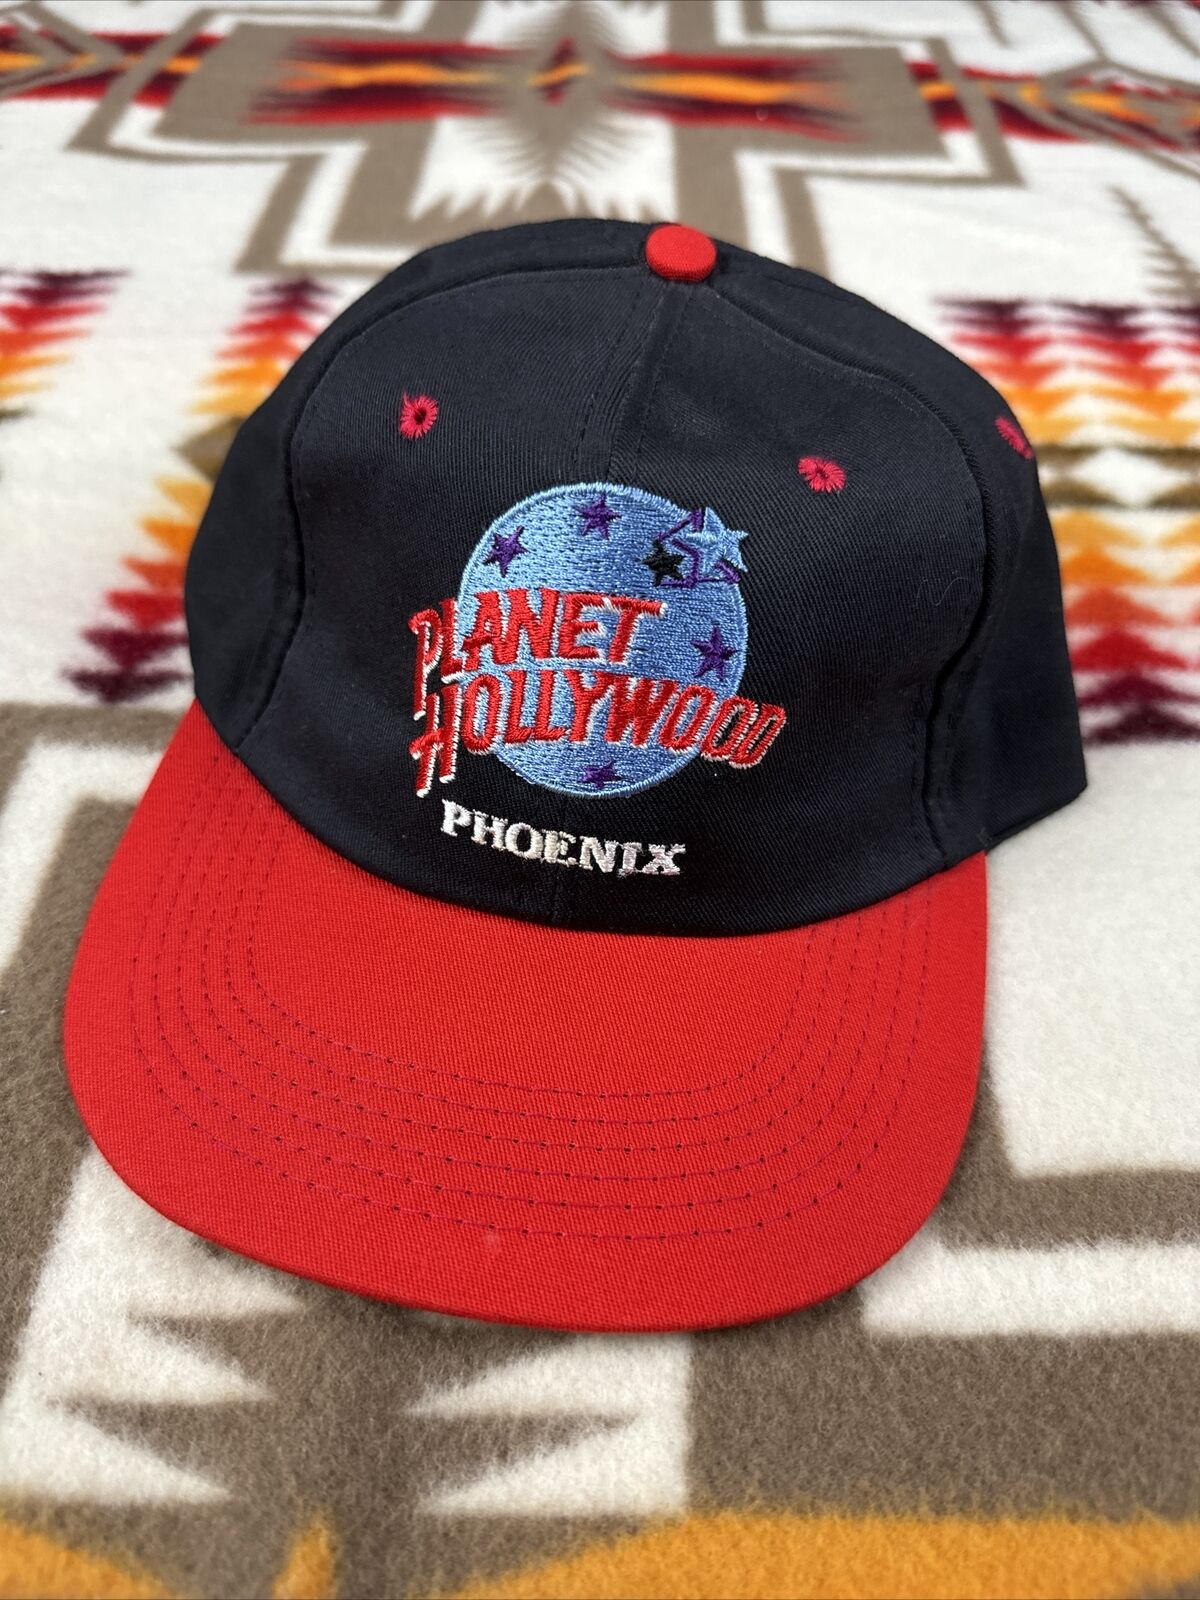 Planet Hollywood Phoenix Vintage Made In USA Snapback Hat Cap Black Red Bill